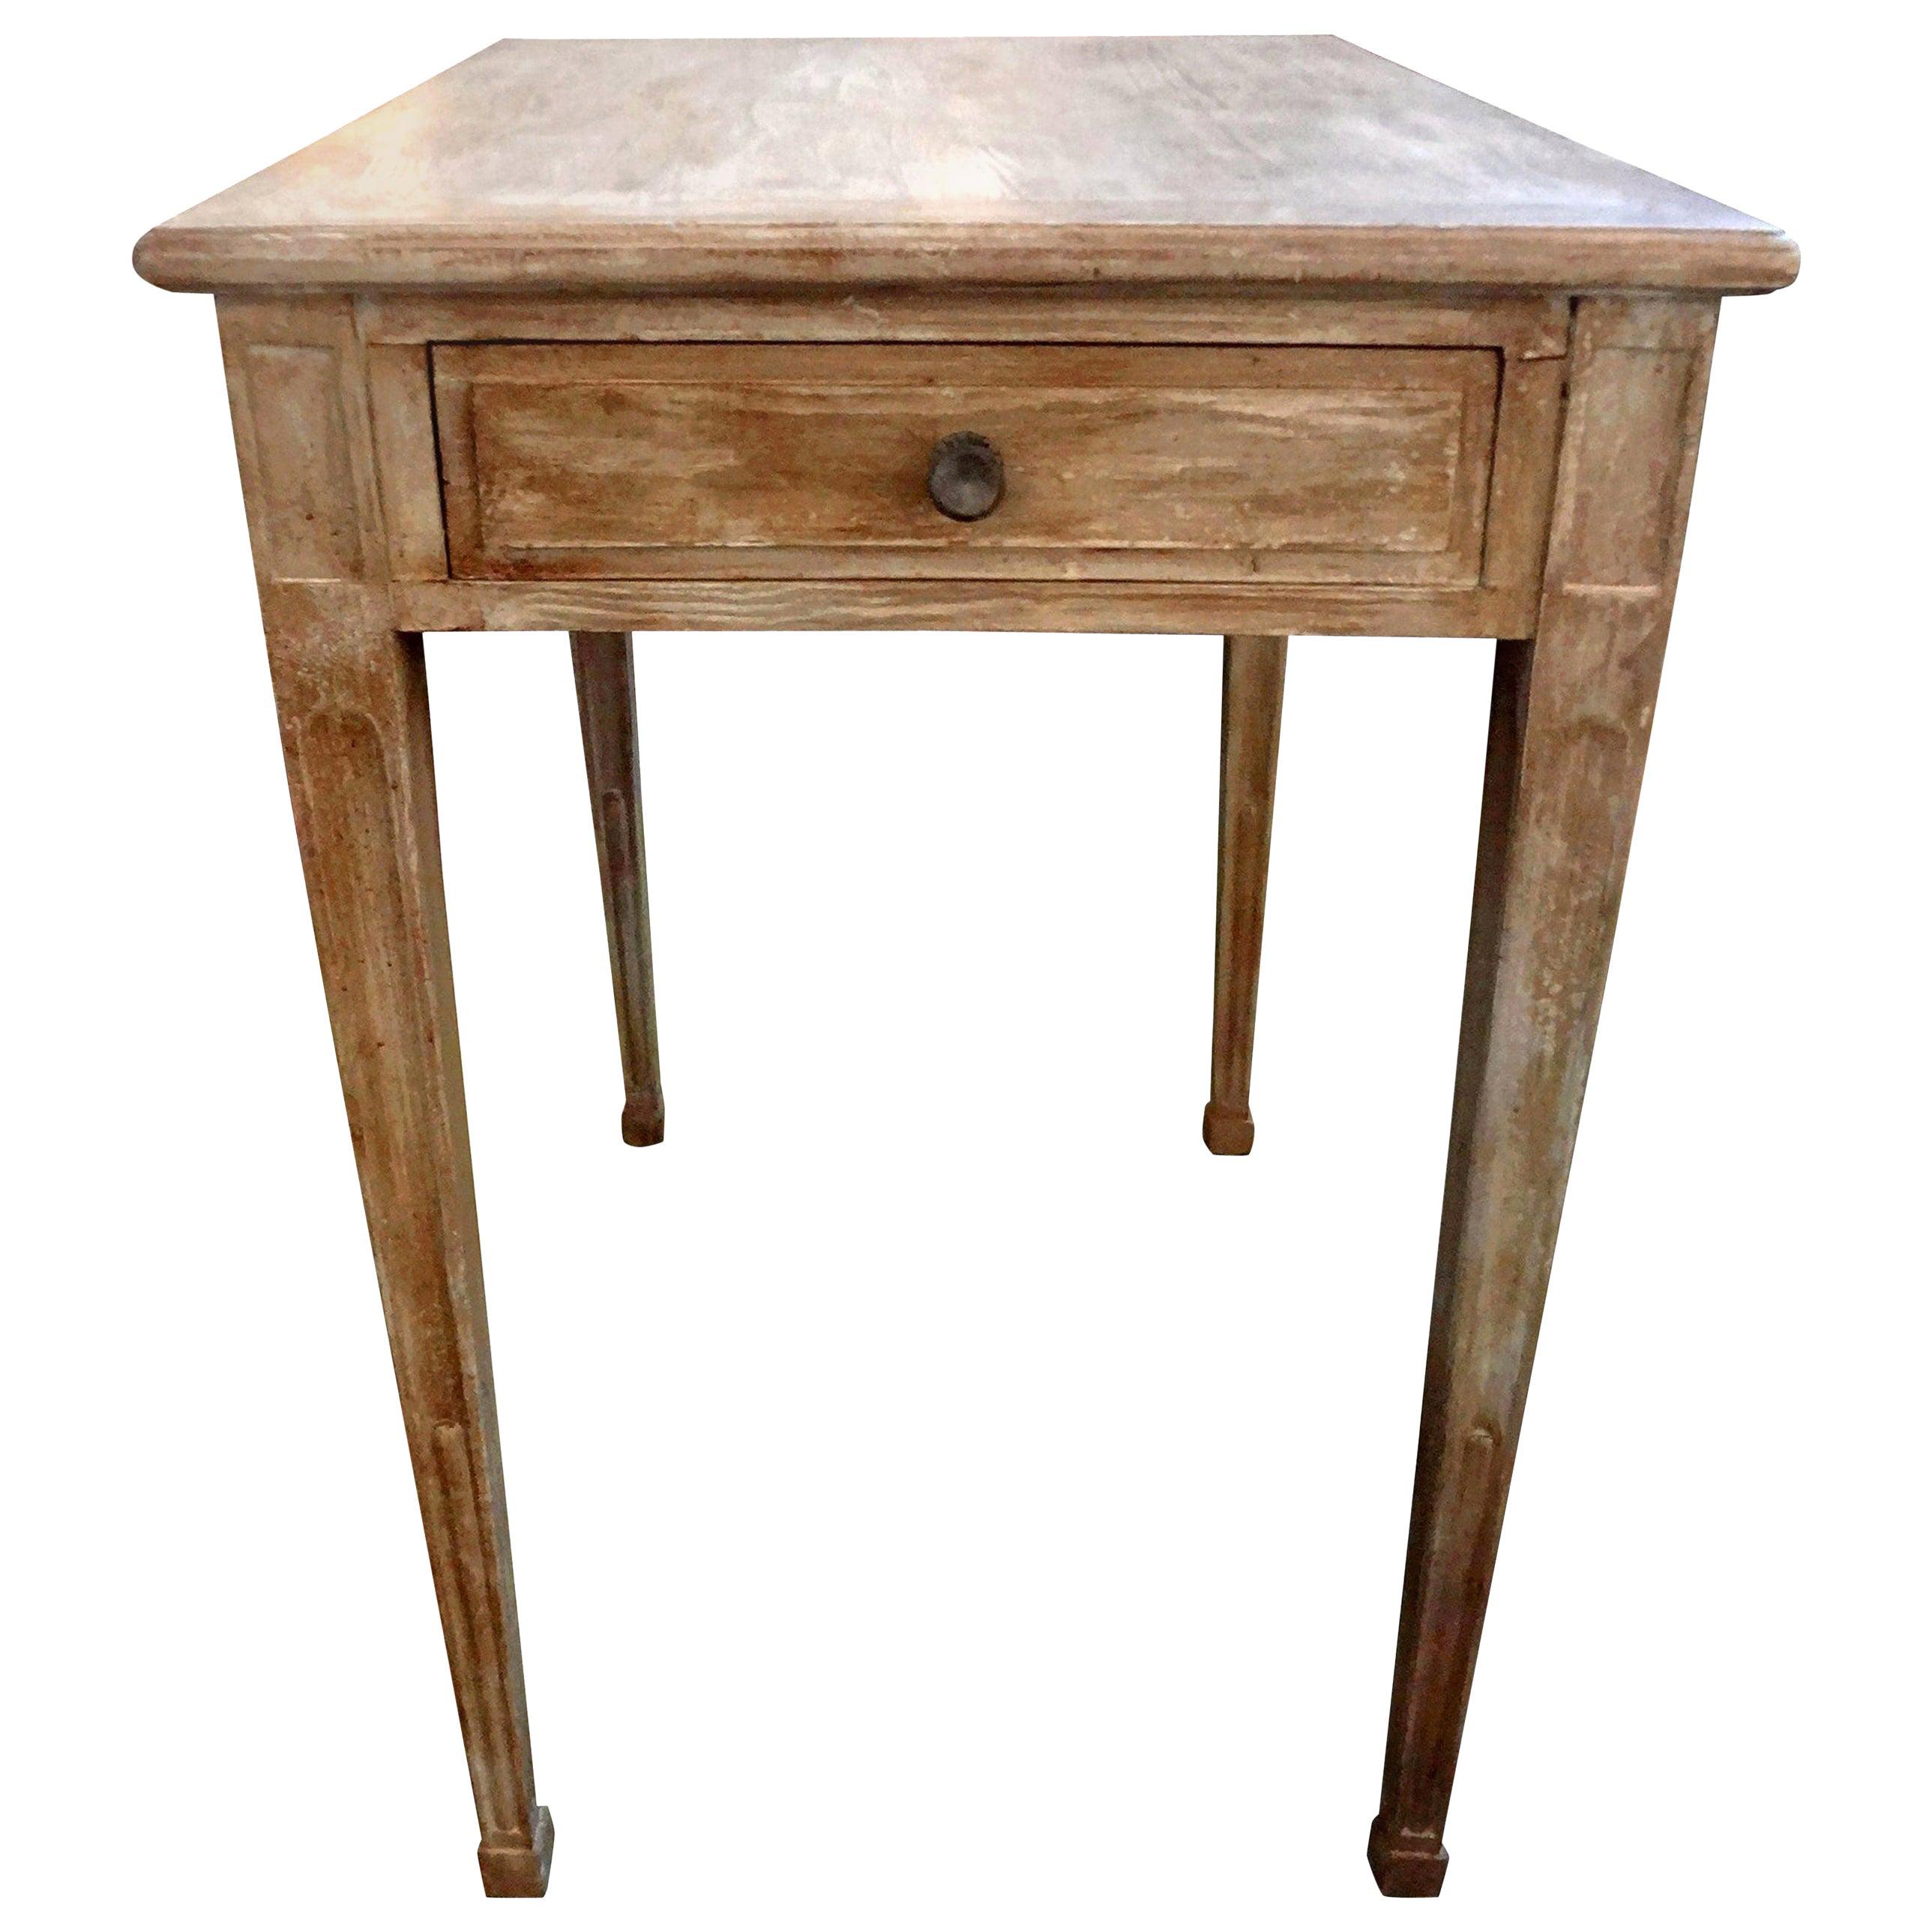 Charming late 19th-early 20th century French Louis XVI style painted guéridon, side table, or drink table with fluted legs and single drawer. Great patina!

 